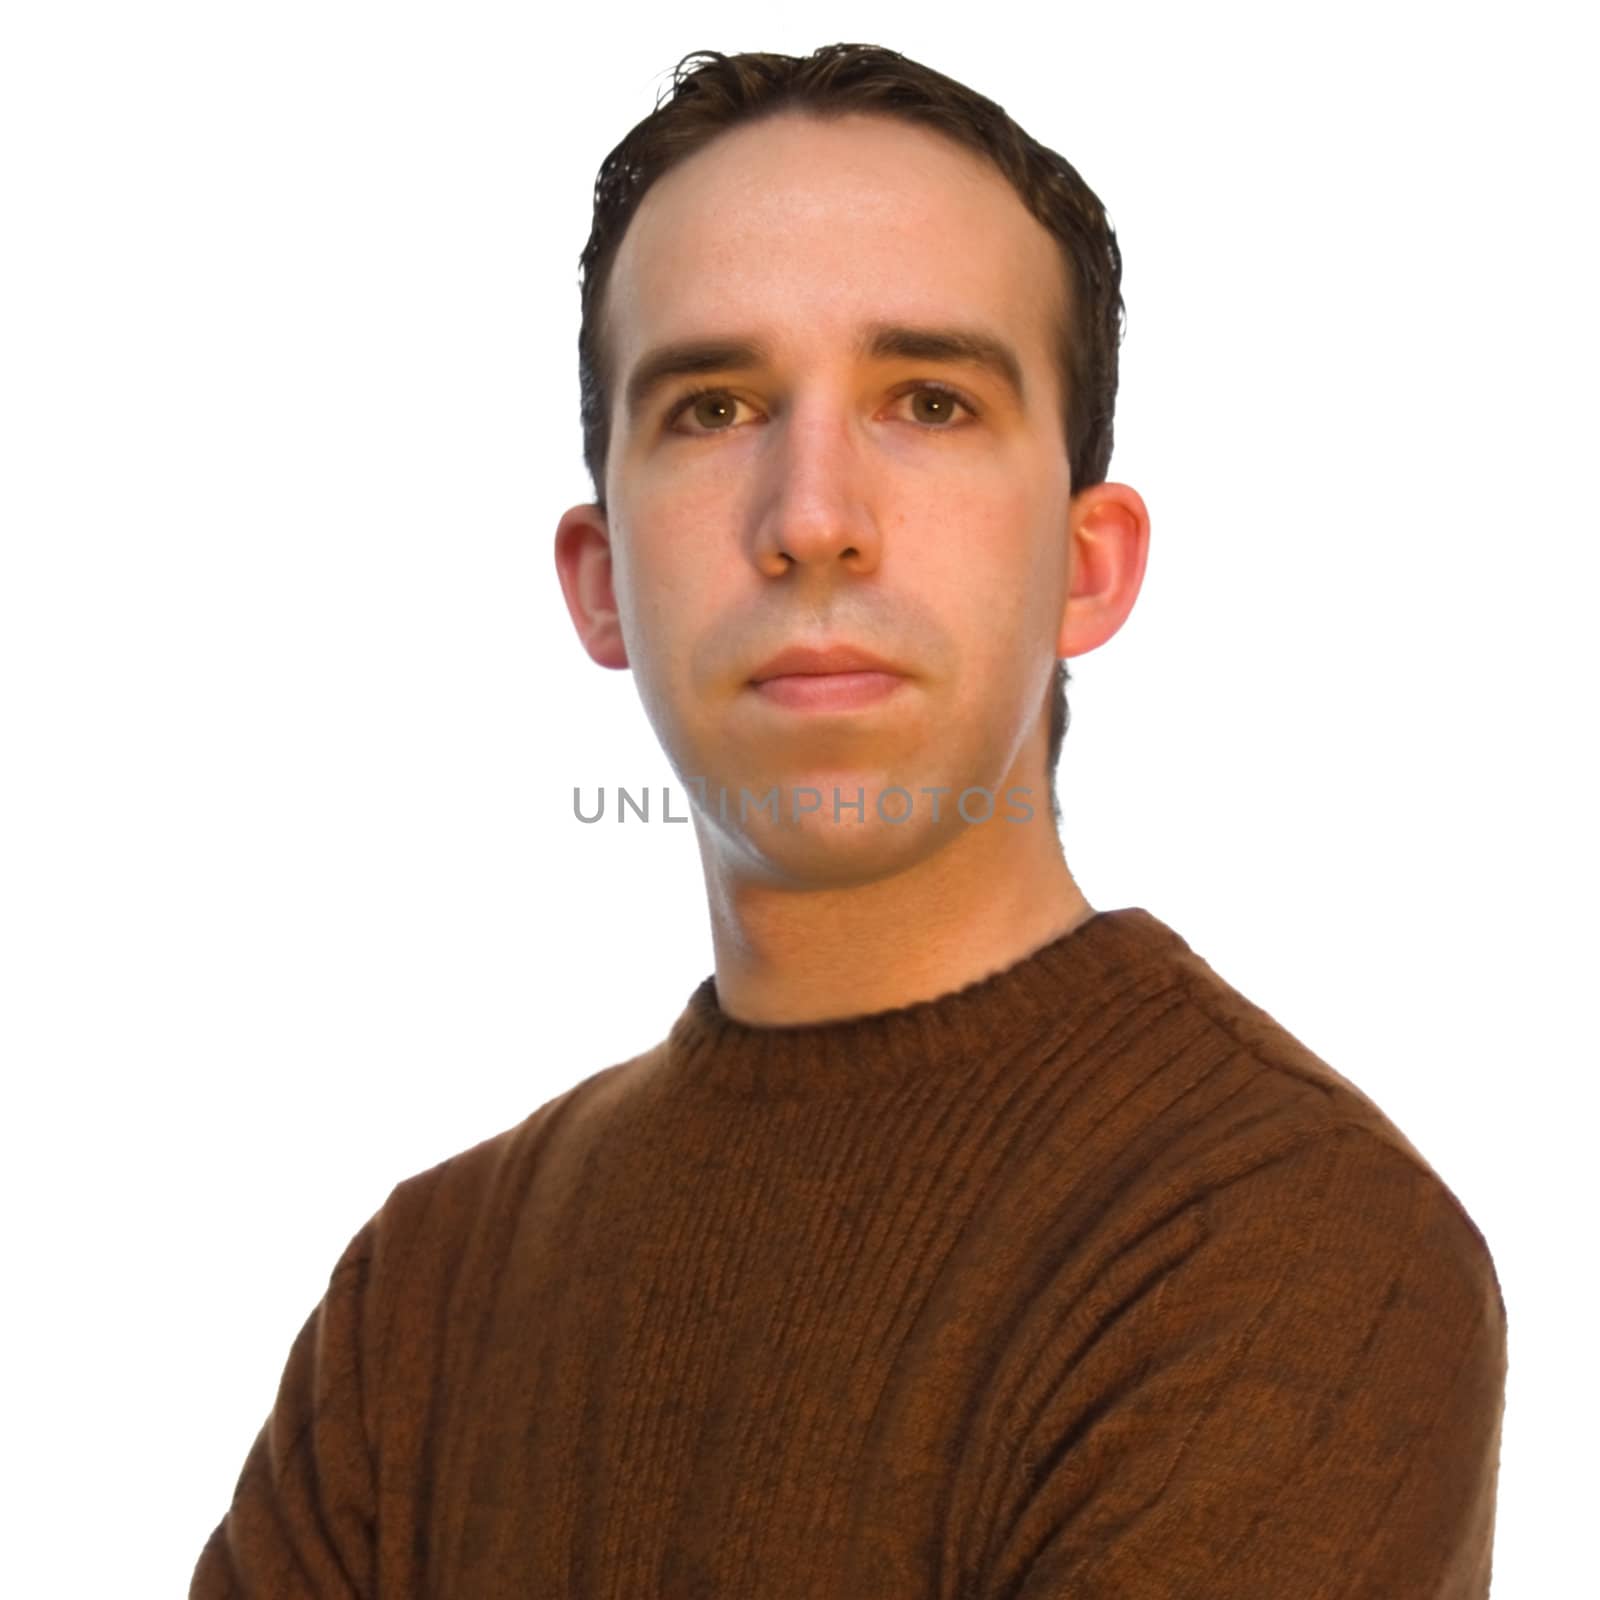 Portrait of a man wearing a brown sweater, isolated against a white background